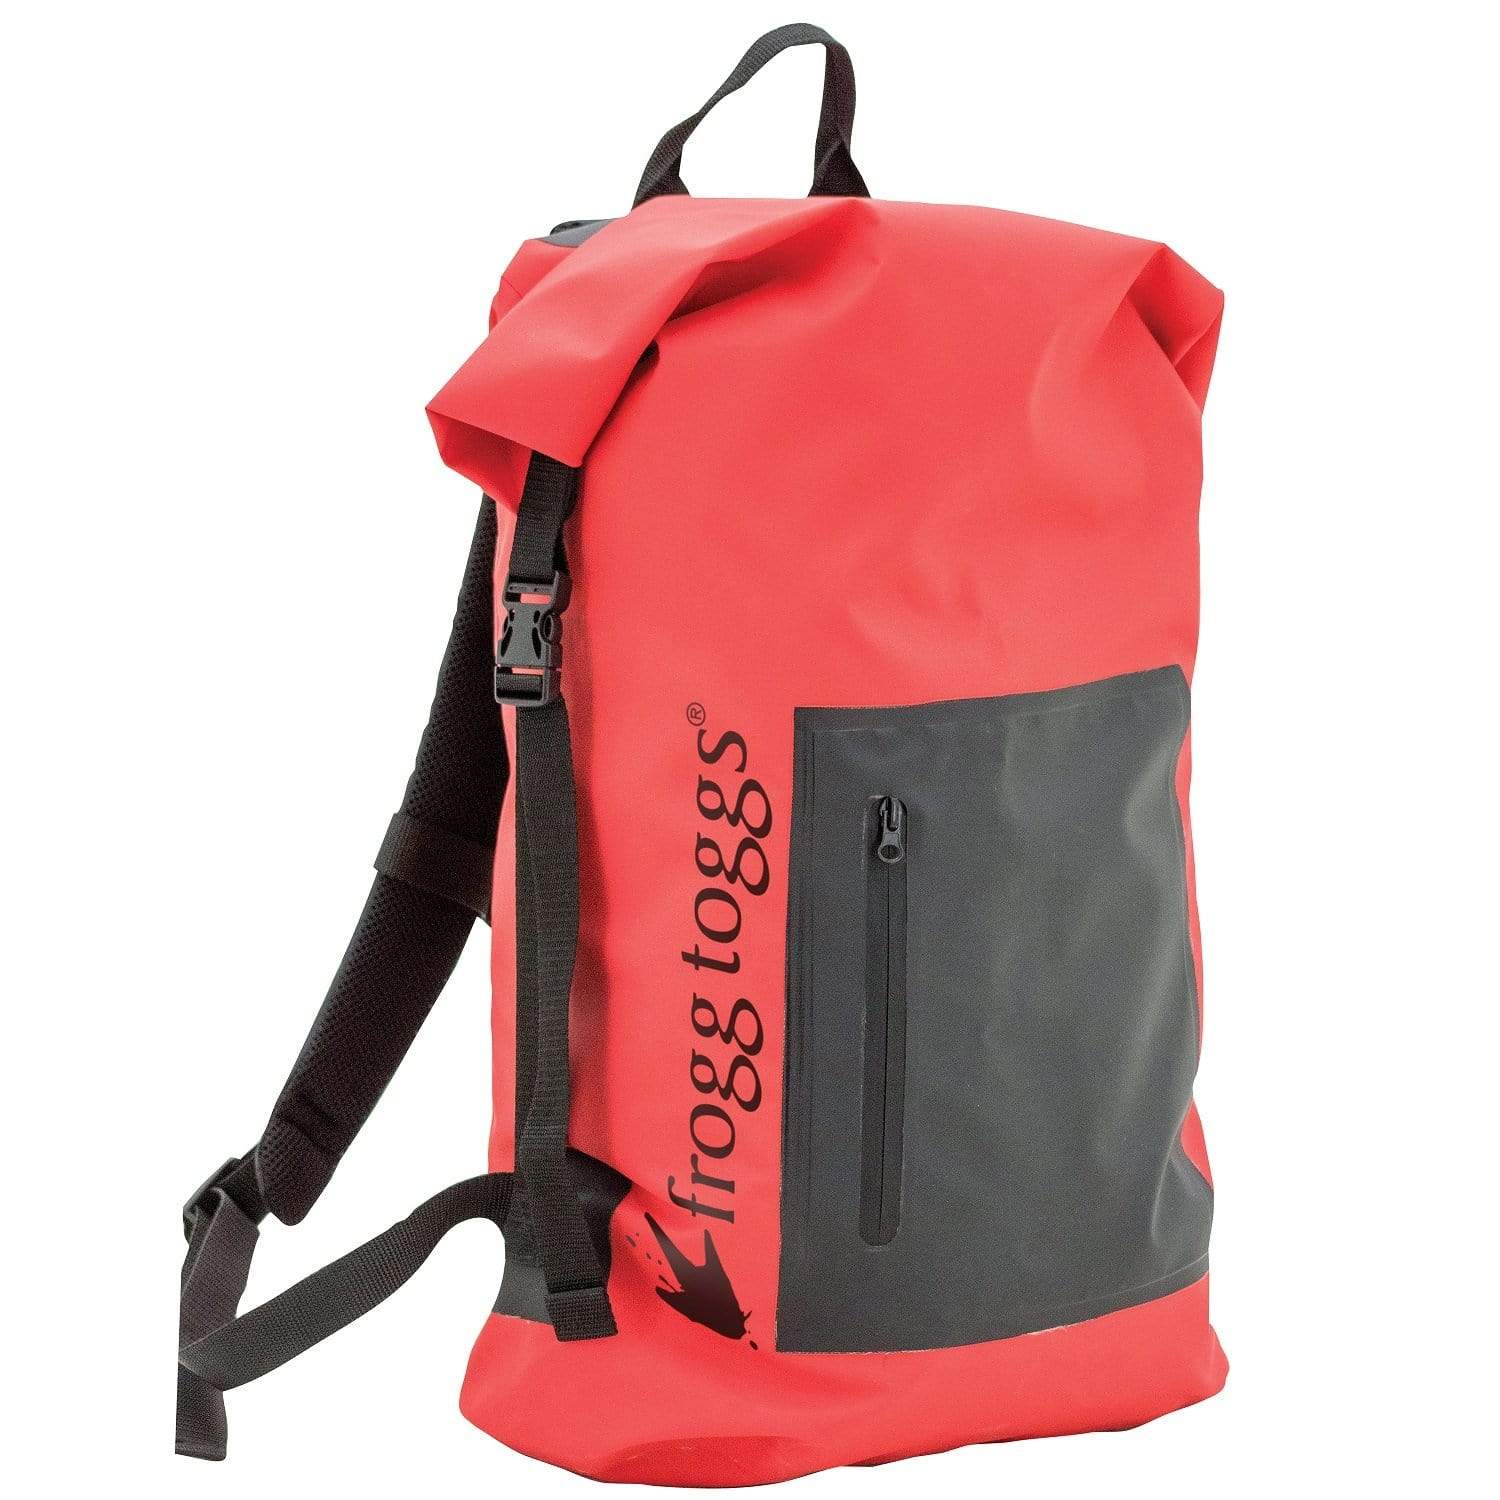 Frogg Toggs Camping & Outdoor : Backpacks & Gearbags Frogg Toggs PVC Tarpaulin Waterproof Backpack Red